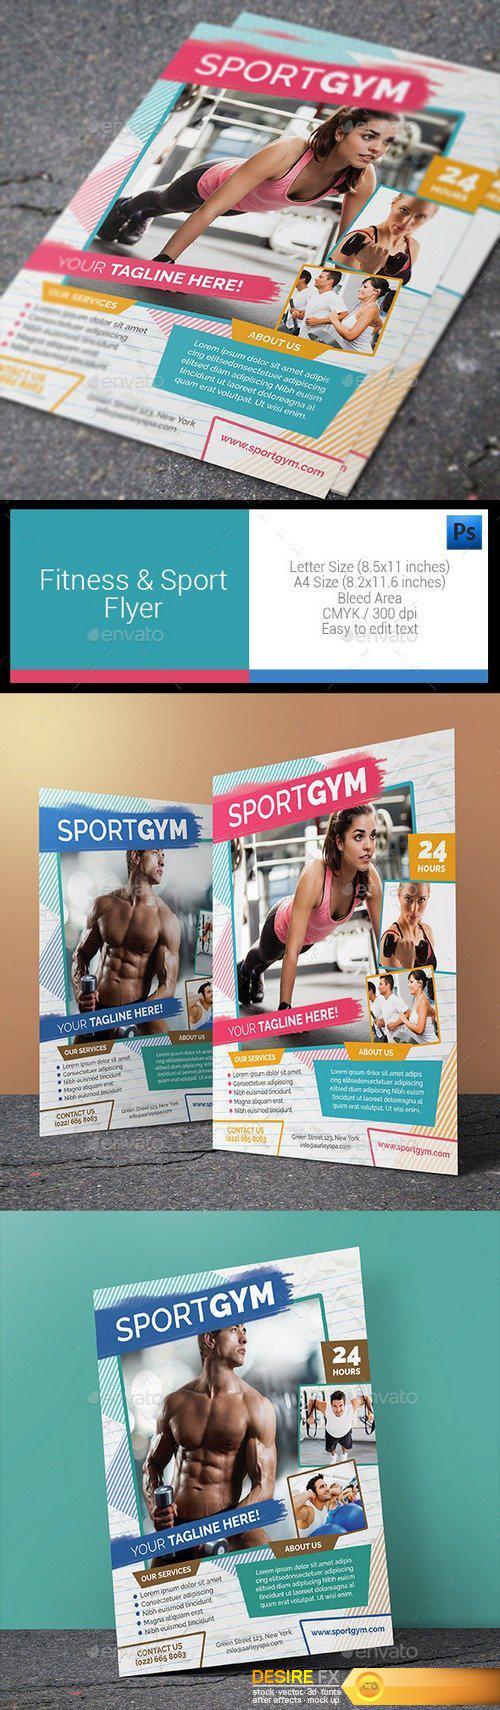 Graphicriver - Fitness & Sport Flyer 11333702